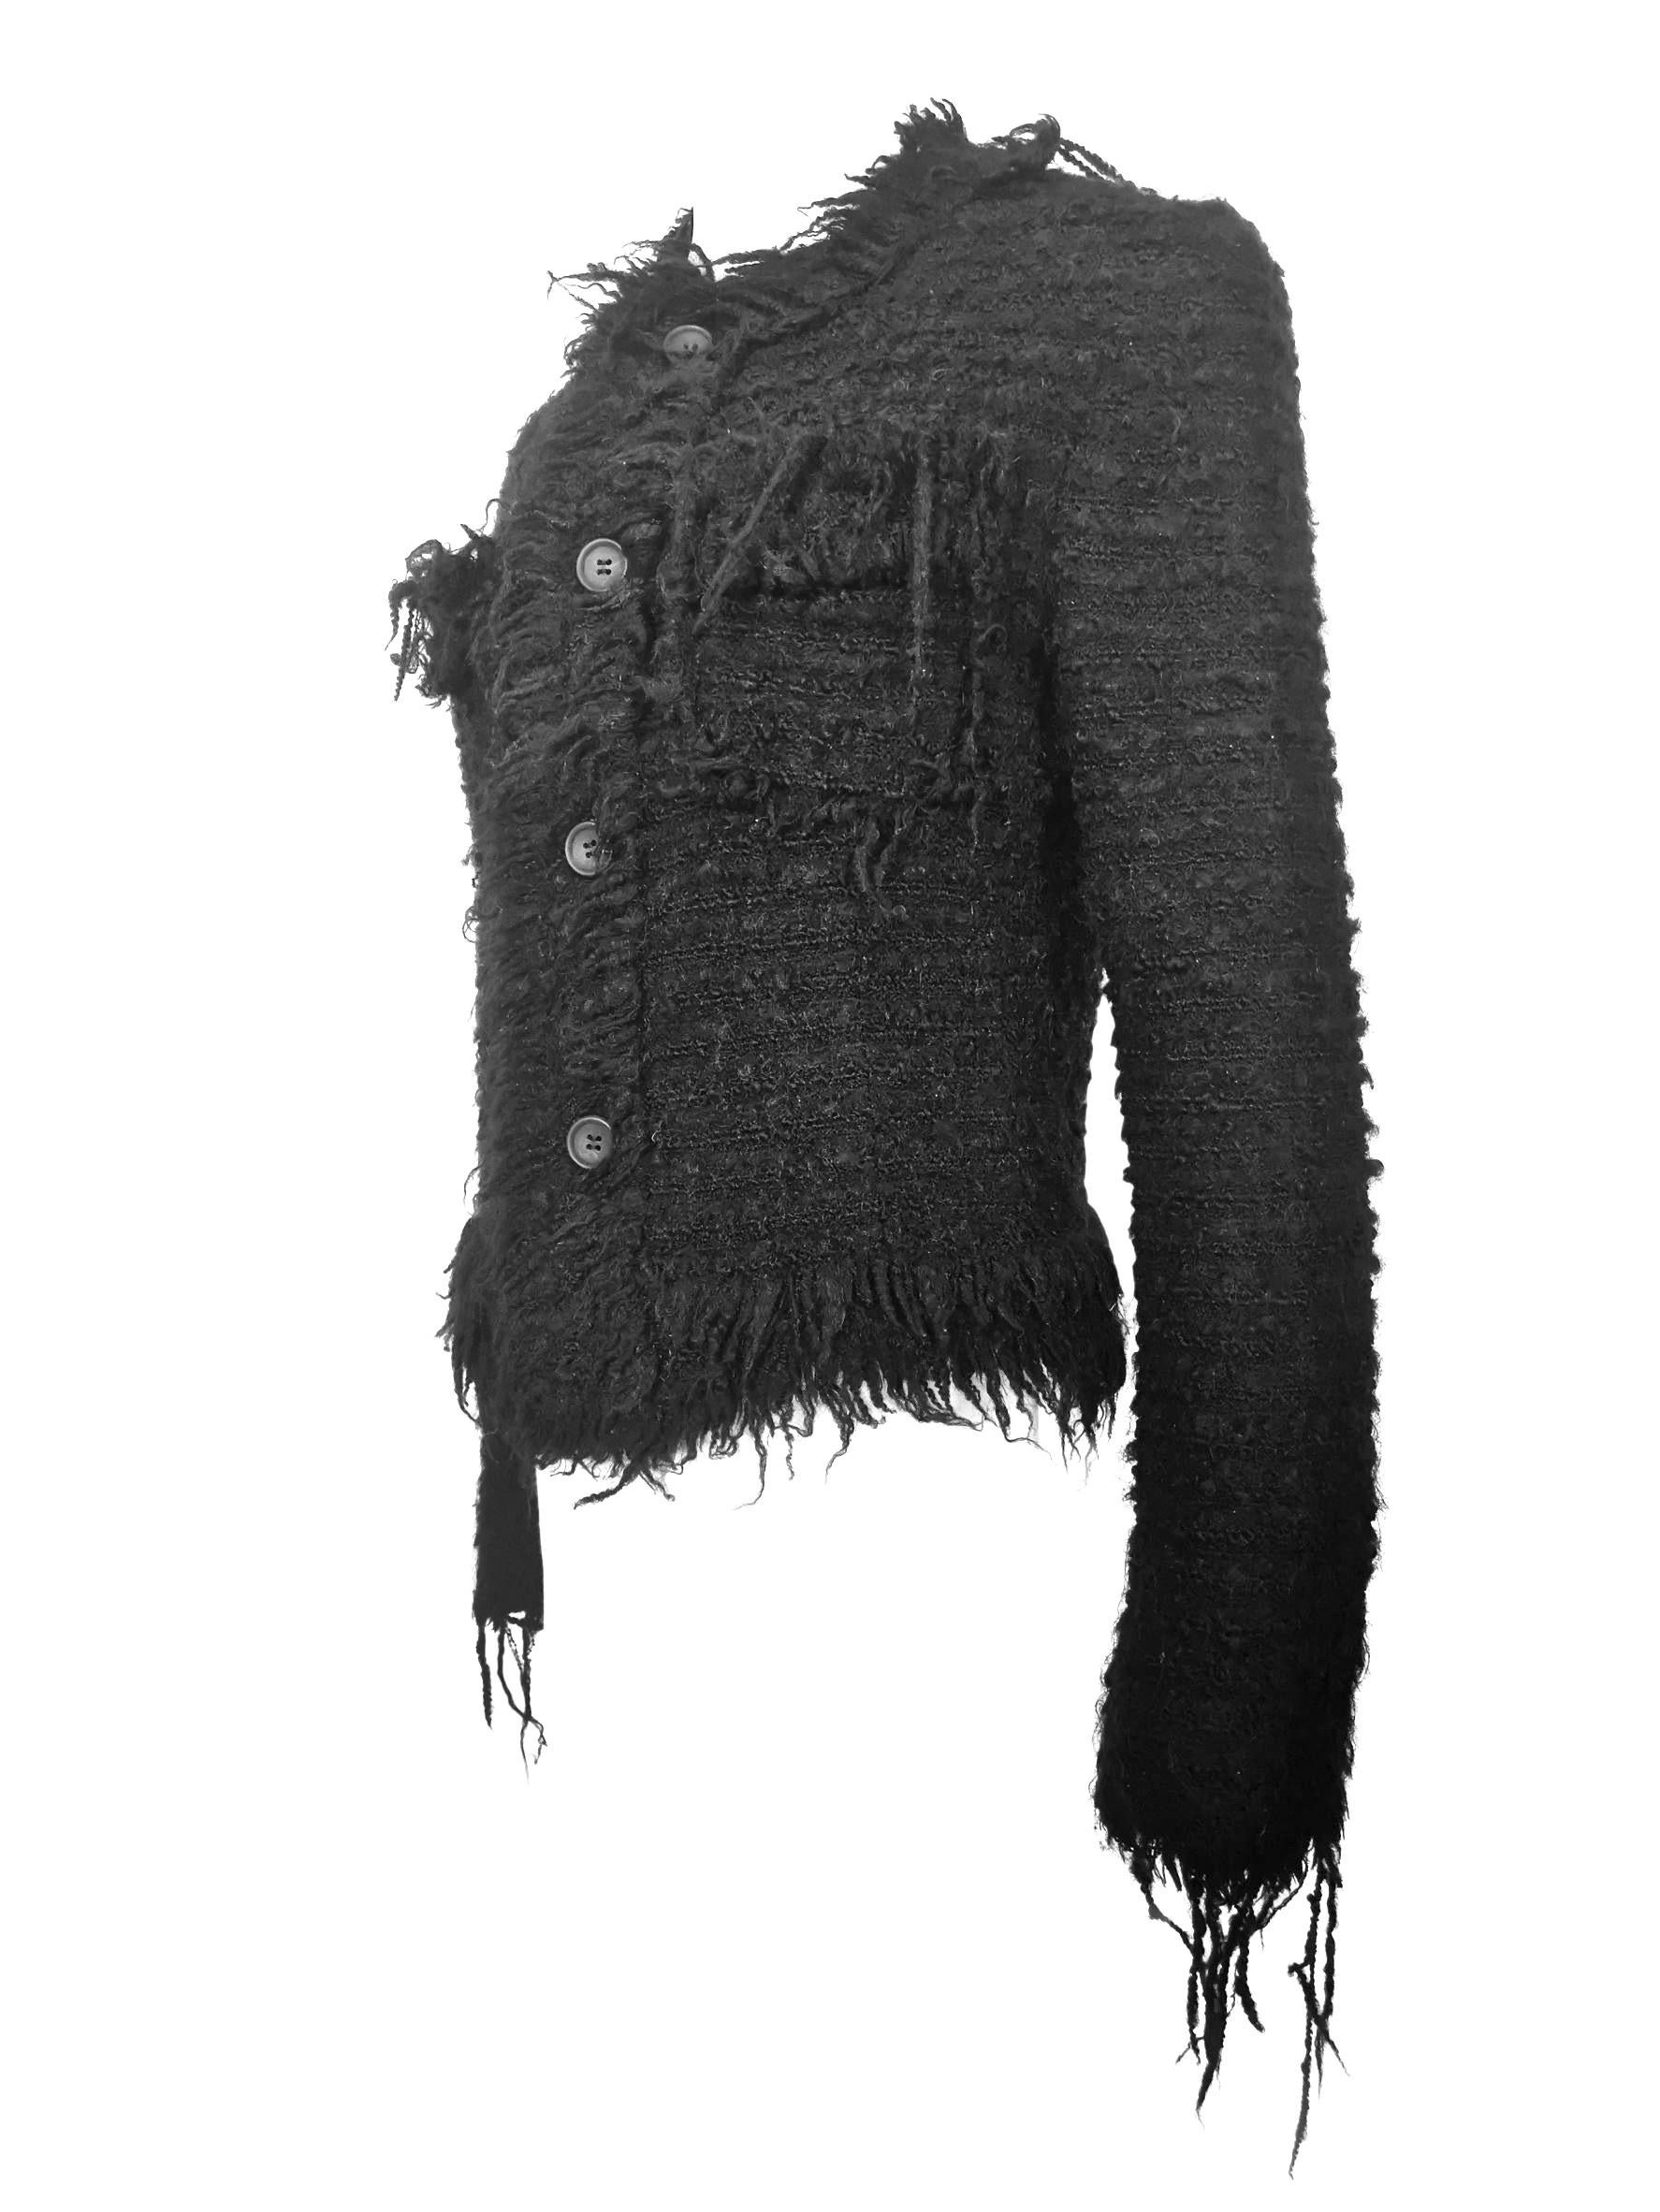 Comme des Garcons Junya Watanabe Cropped Chanel Style Fringed Jacket AD 2003 1